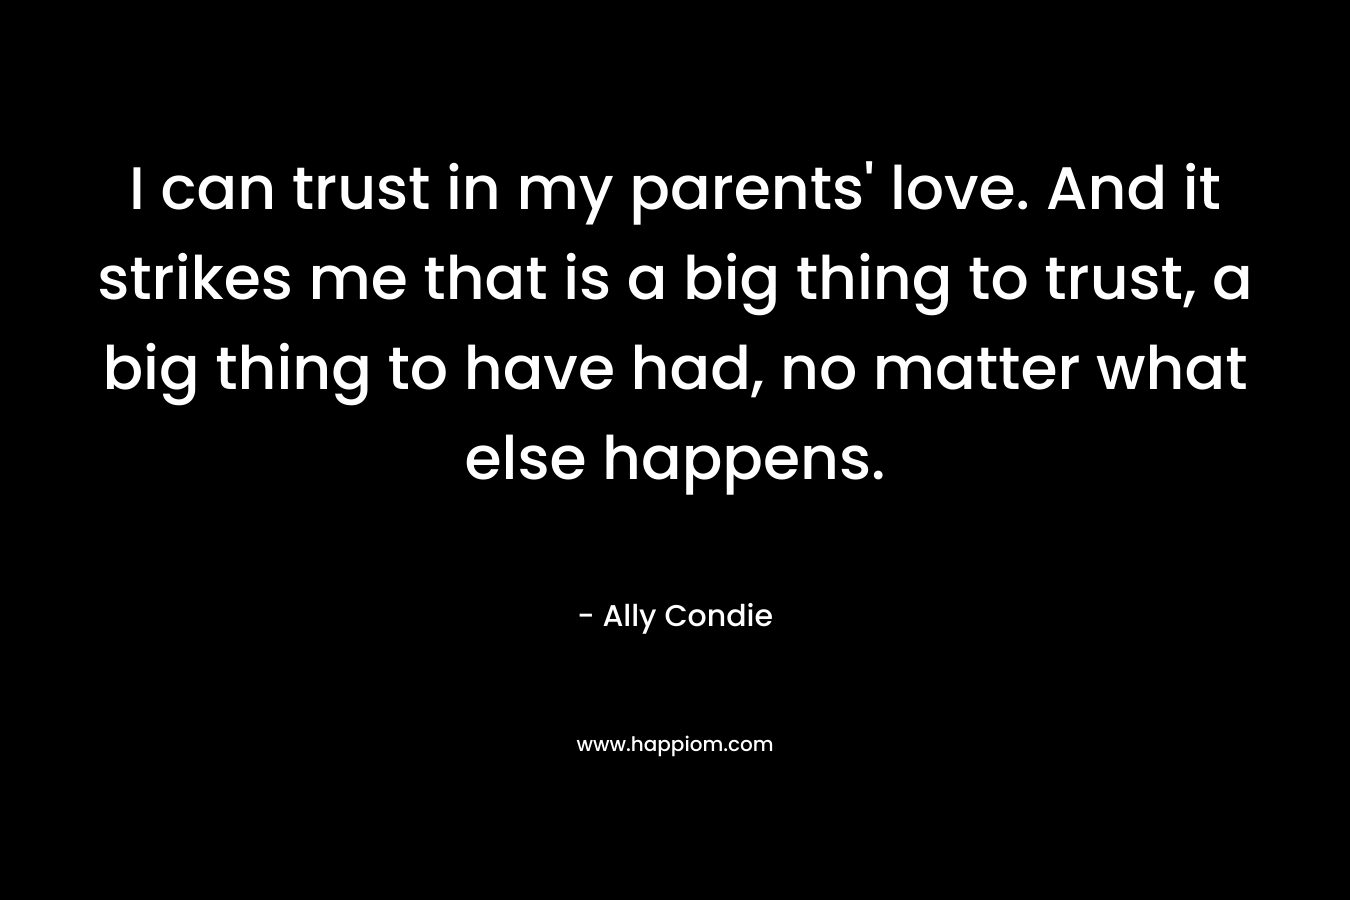 I can trust in my parents' love. And it strikes me that is a big thing to trust, a big thing to have had, no matter what else happens.